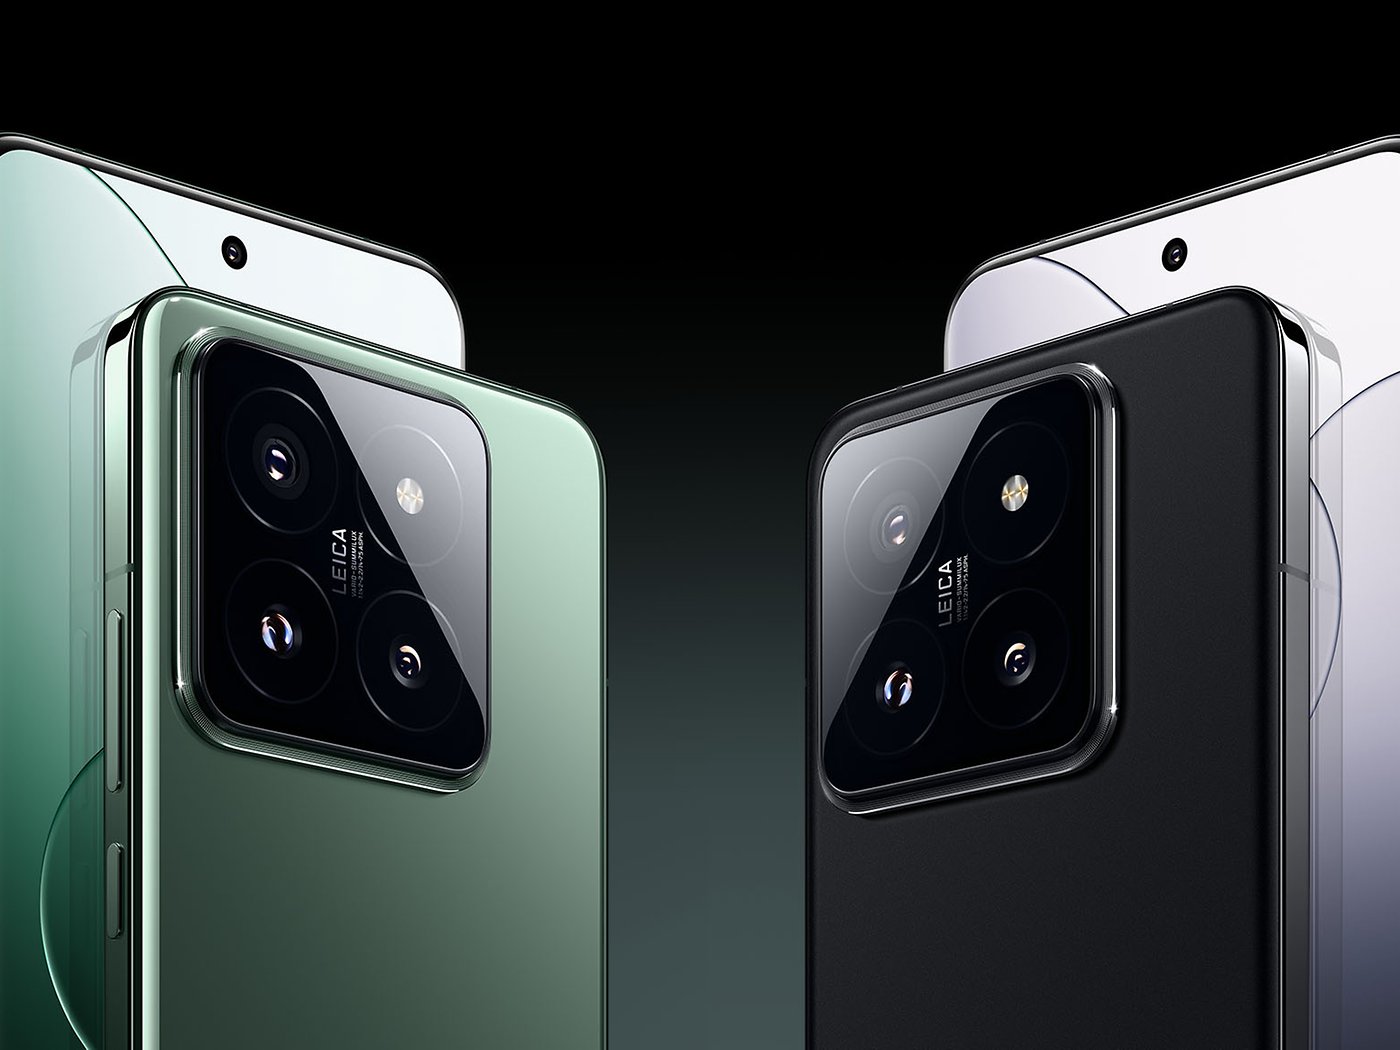 The Xiaomi 14 Pro packs a faster Leica camera and comes in a